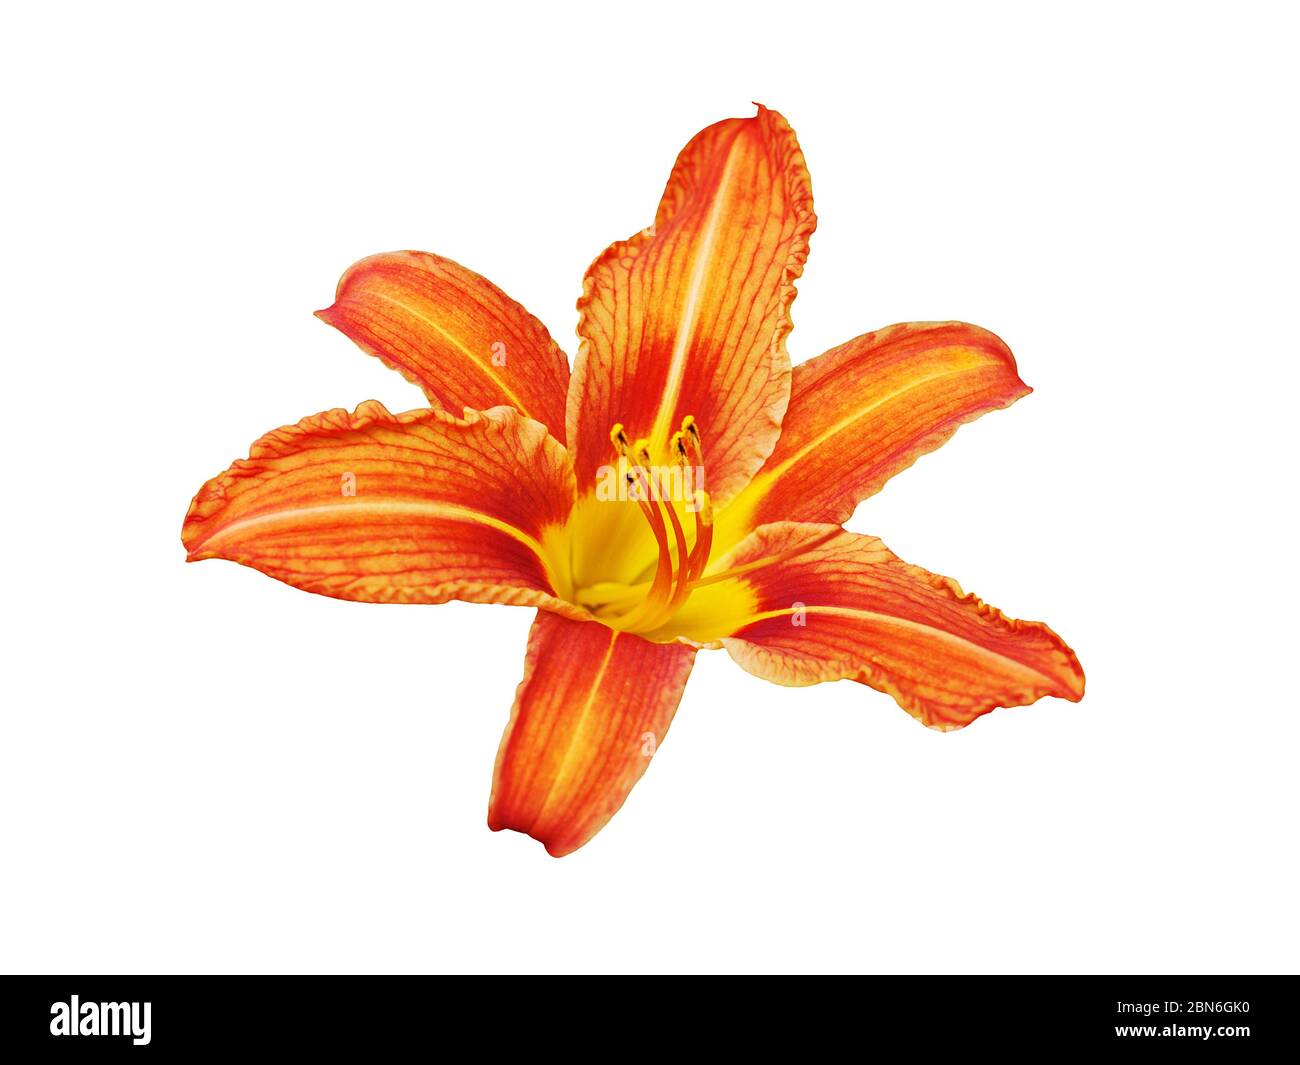 Orange day lily flower white background isolated close up, red and yellow petals lilly, bright beautiful hippeastrum macro, colorful amaryllis flower Stock Photo